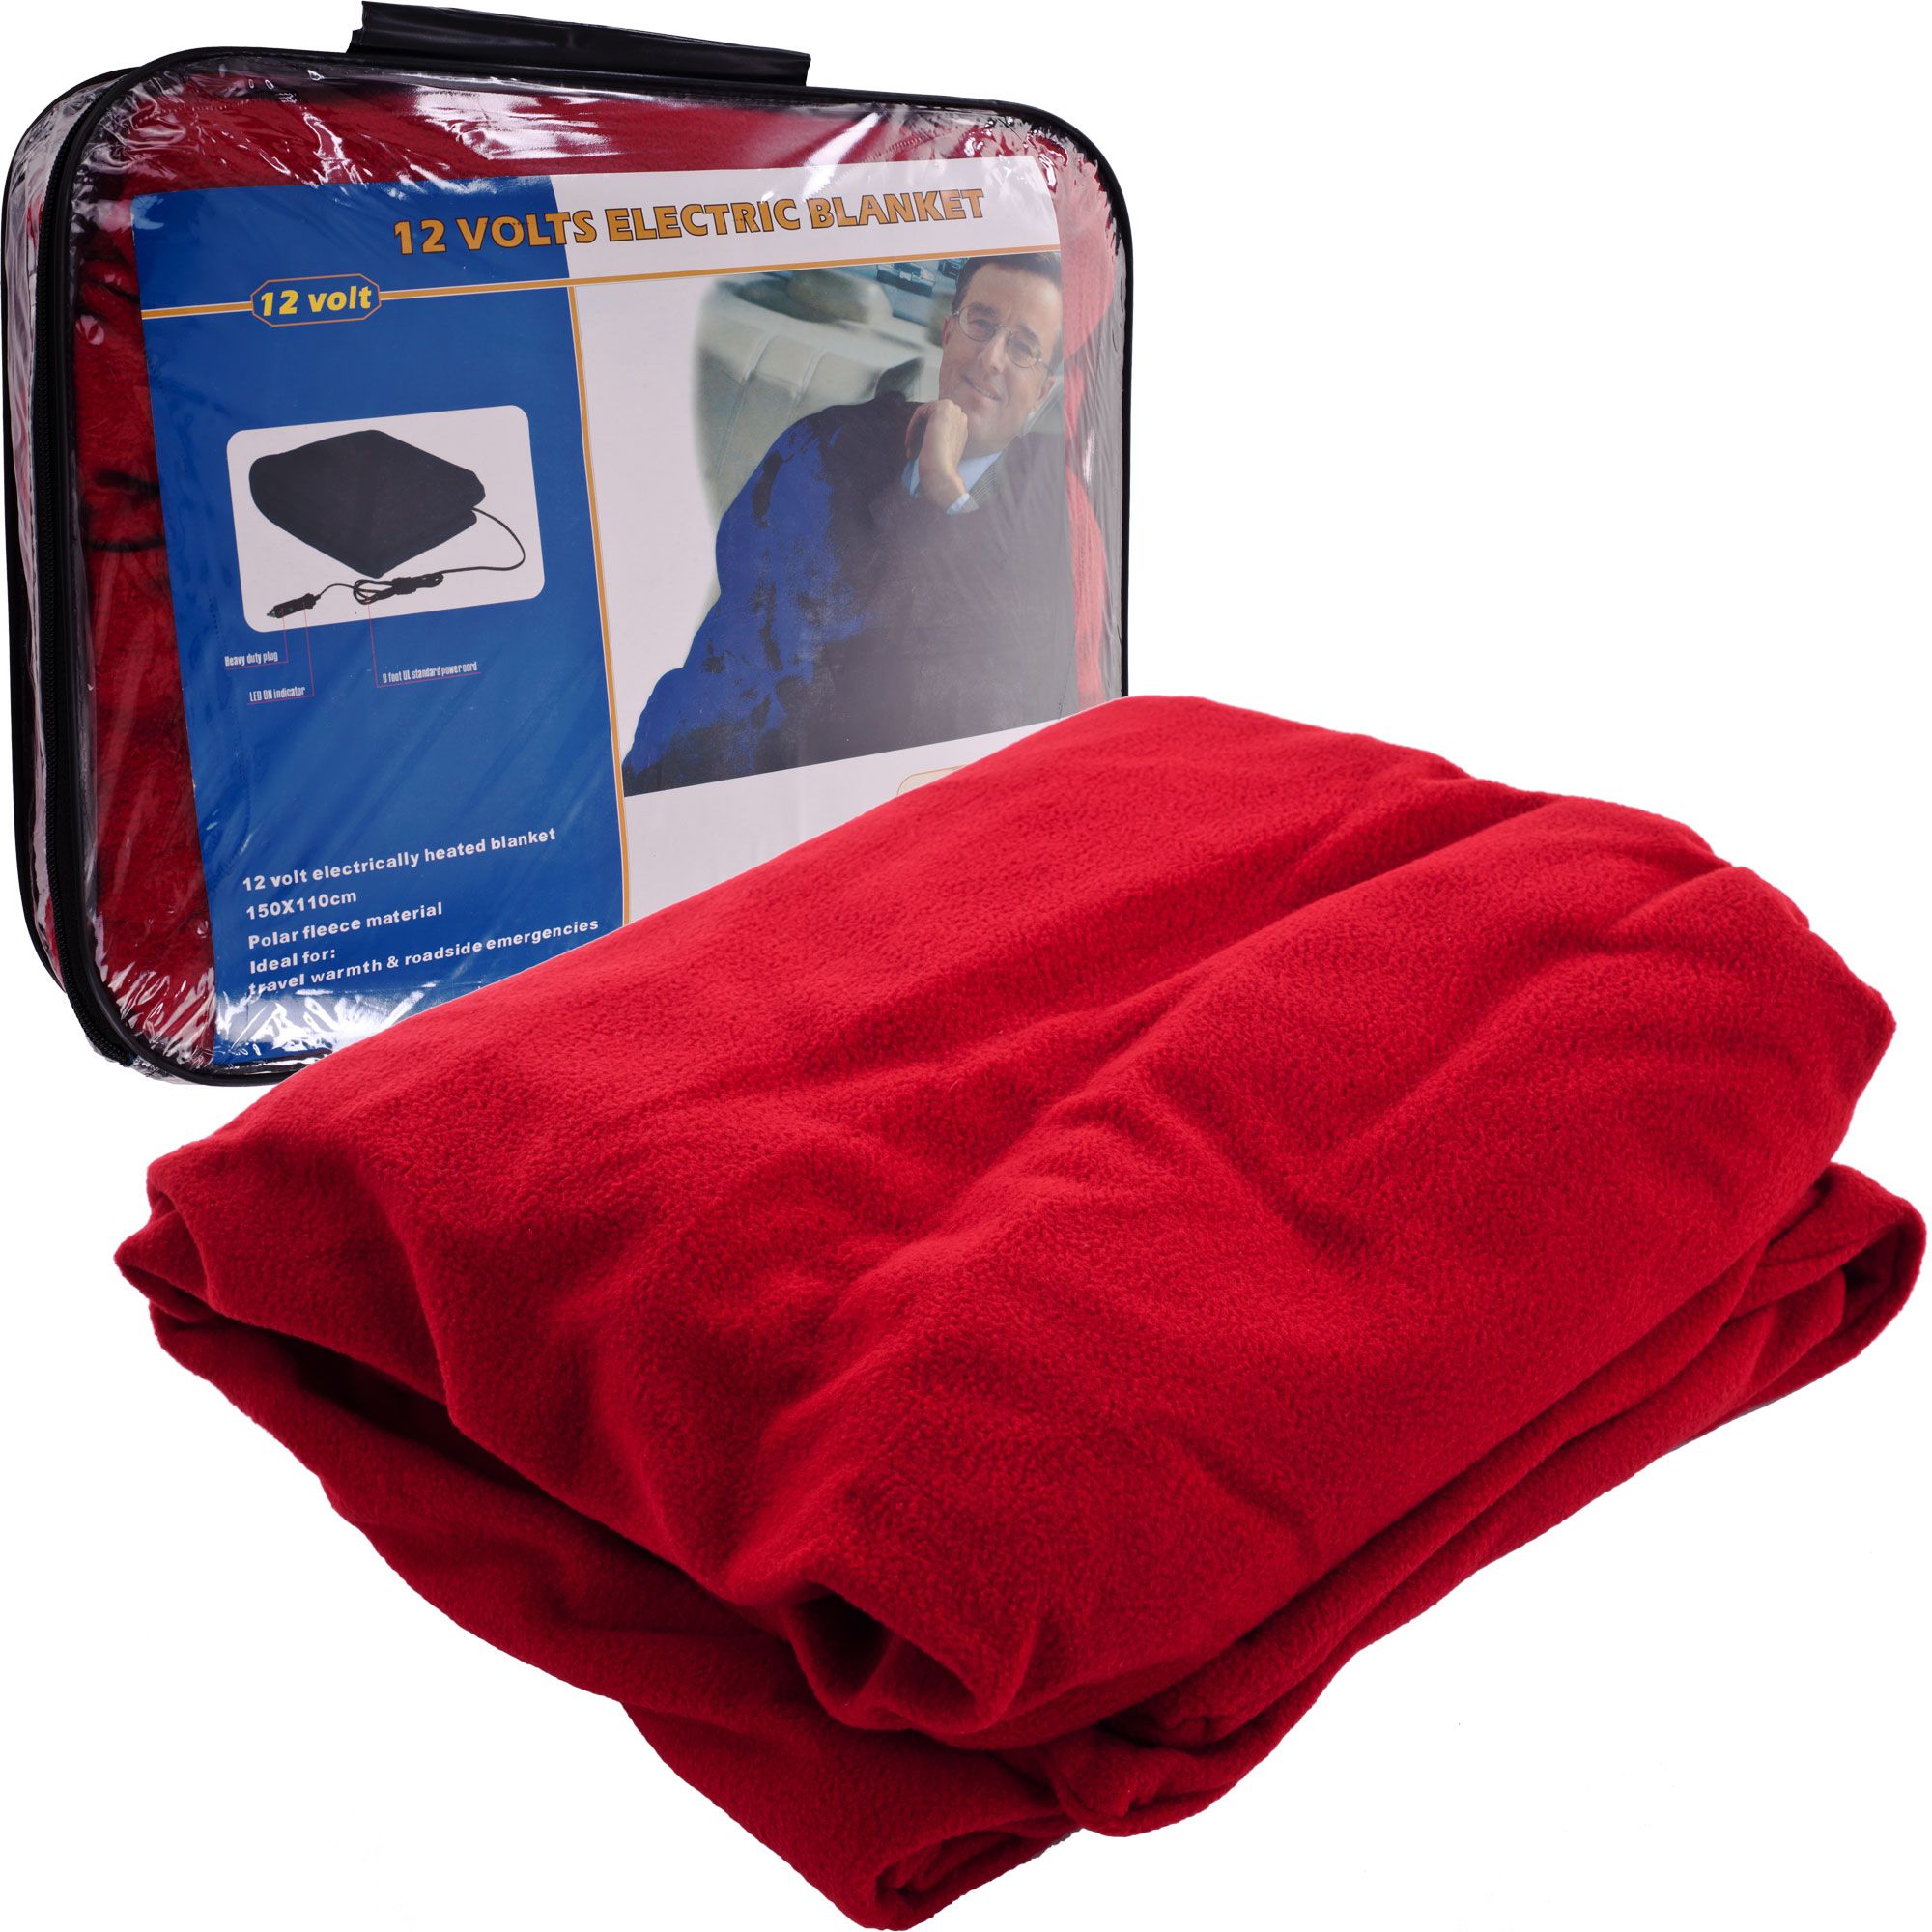 Trademark Tools Electric Blanket for Automobile - 12 volt - Red